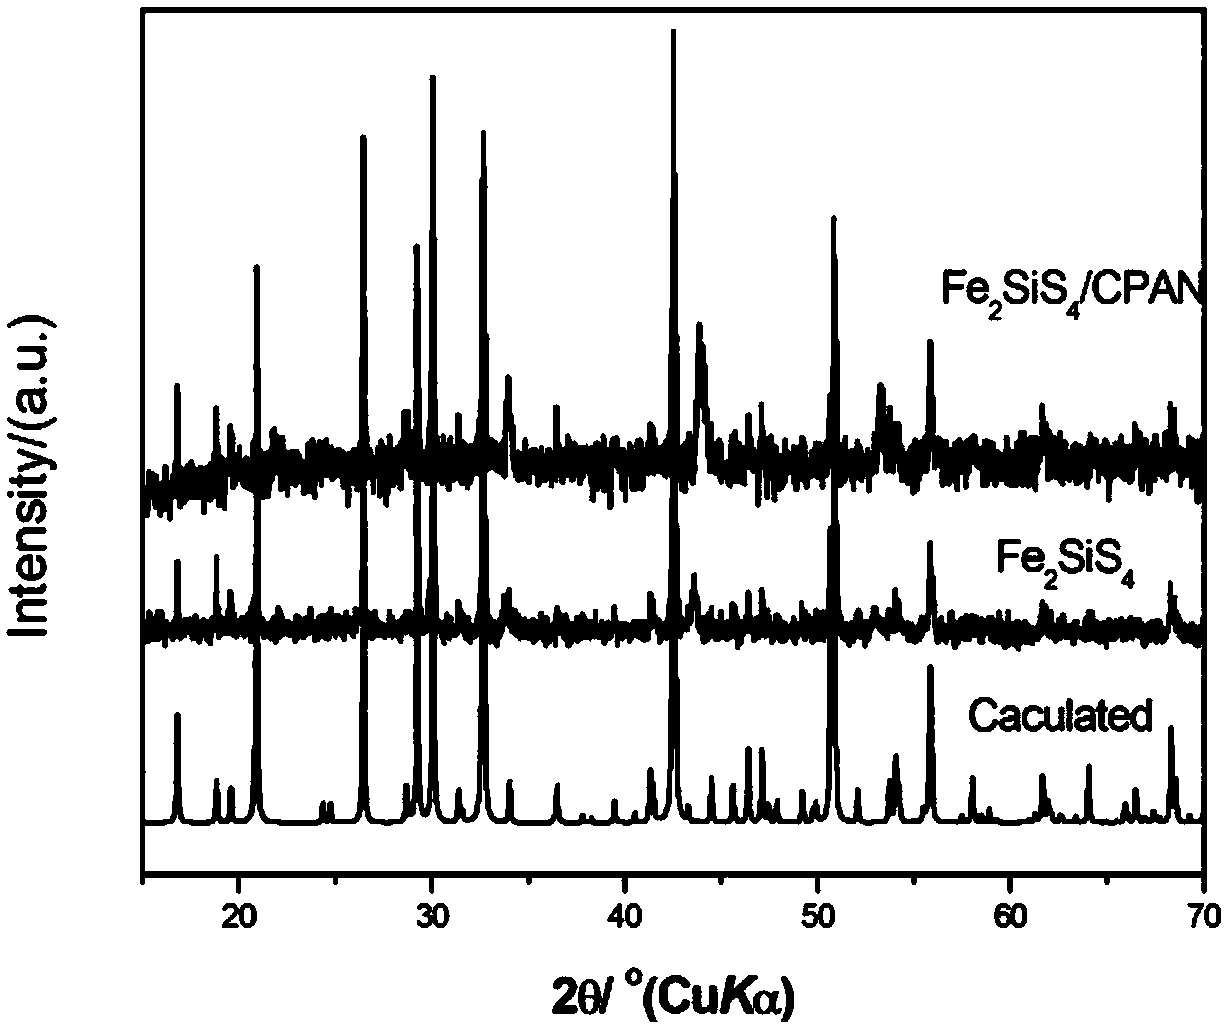 A lithium ion battery negative electrode material fe2sis4 and its composite material fe2sis4/cpan